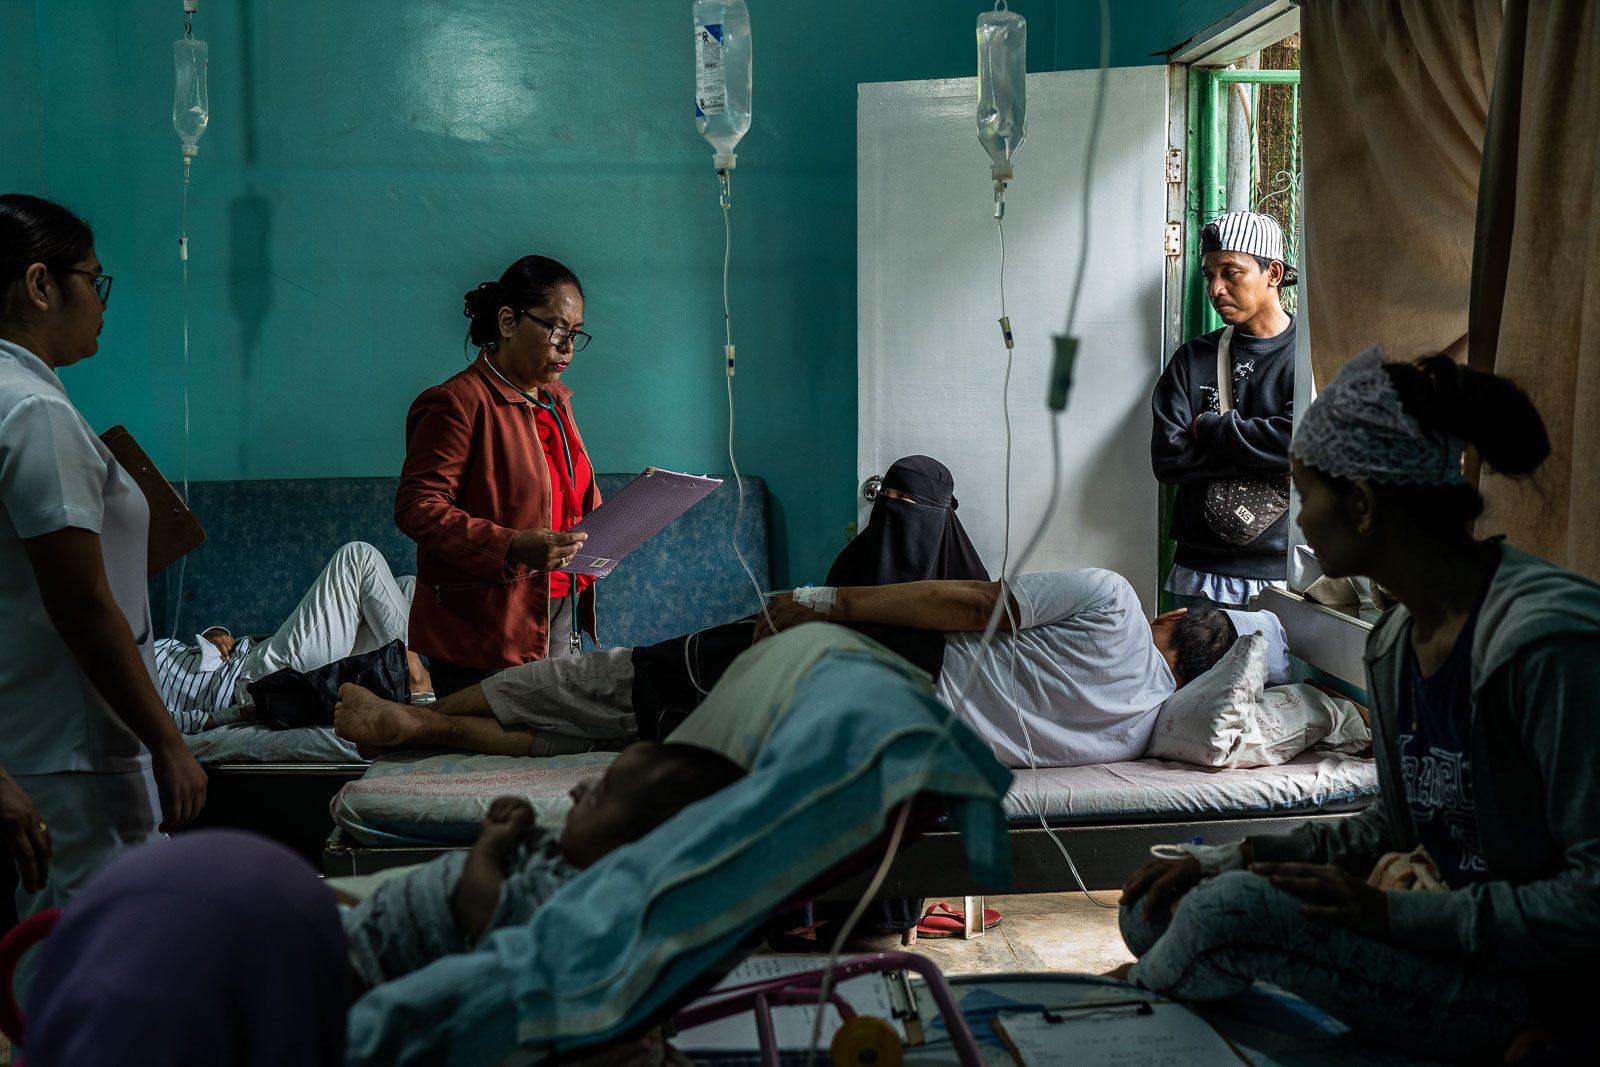 The doctor healing the wounds of war in Basilan